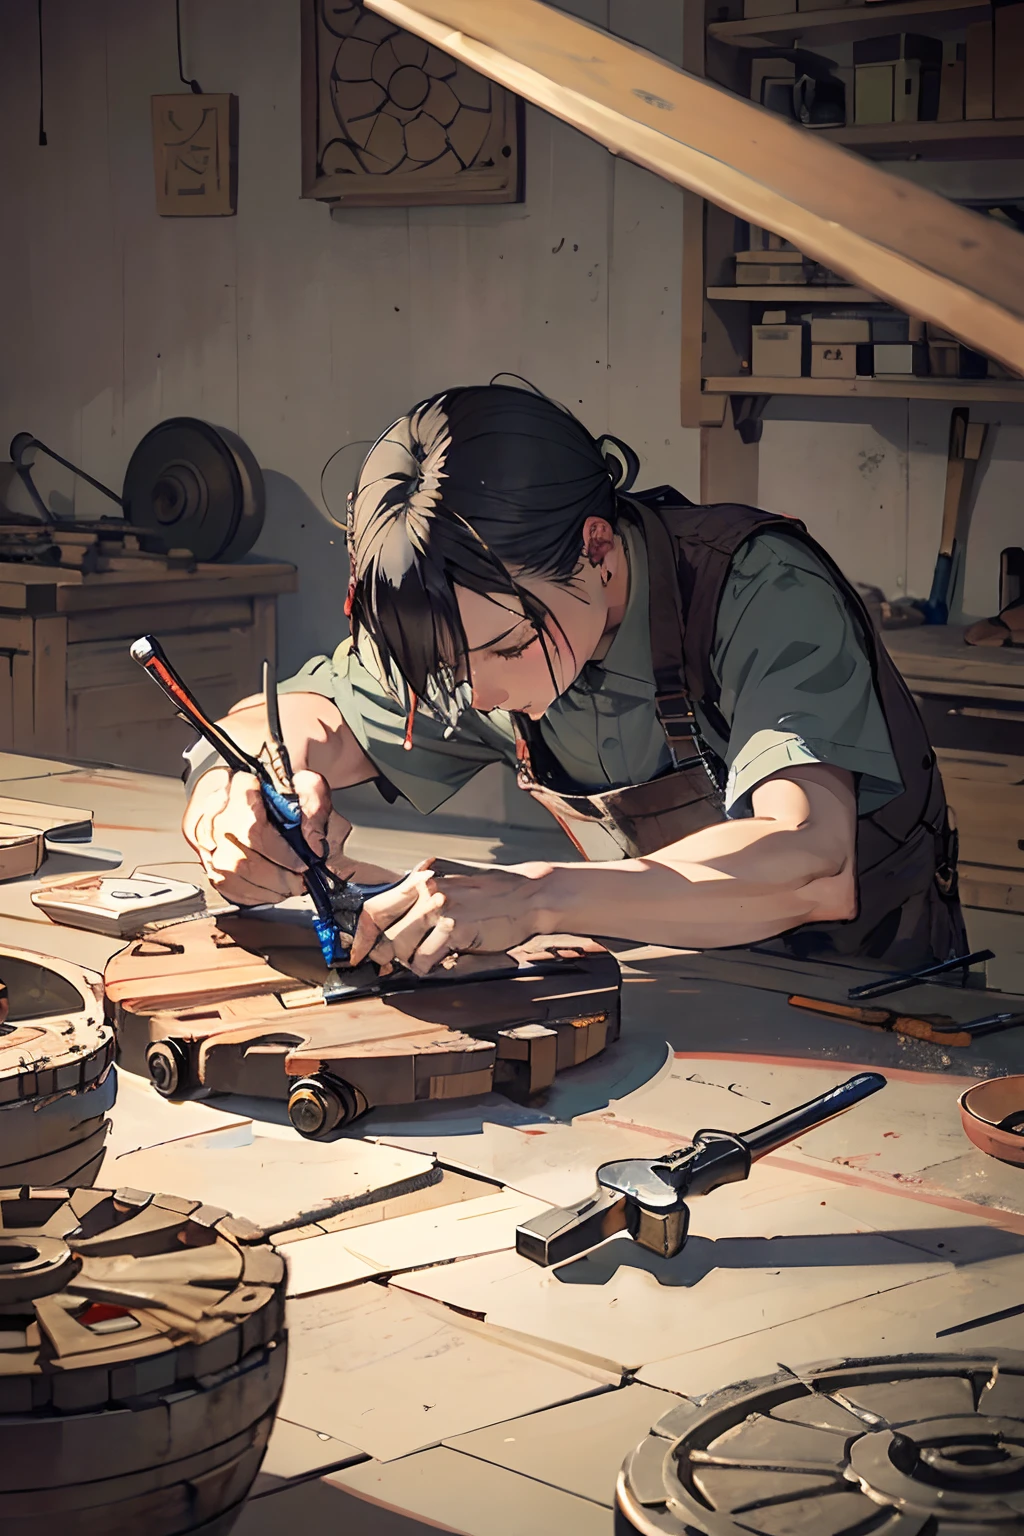 Illustrate a skilled craftsman meticulously working on common 工具 like 車輪s and vehicles. Emphasize the craftsmanship and 精確 in the work.
關鍵字: 工匠, 男生, 中國藝術品, 工具, 車輪, 專業知識, 精確.